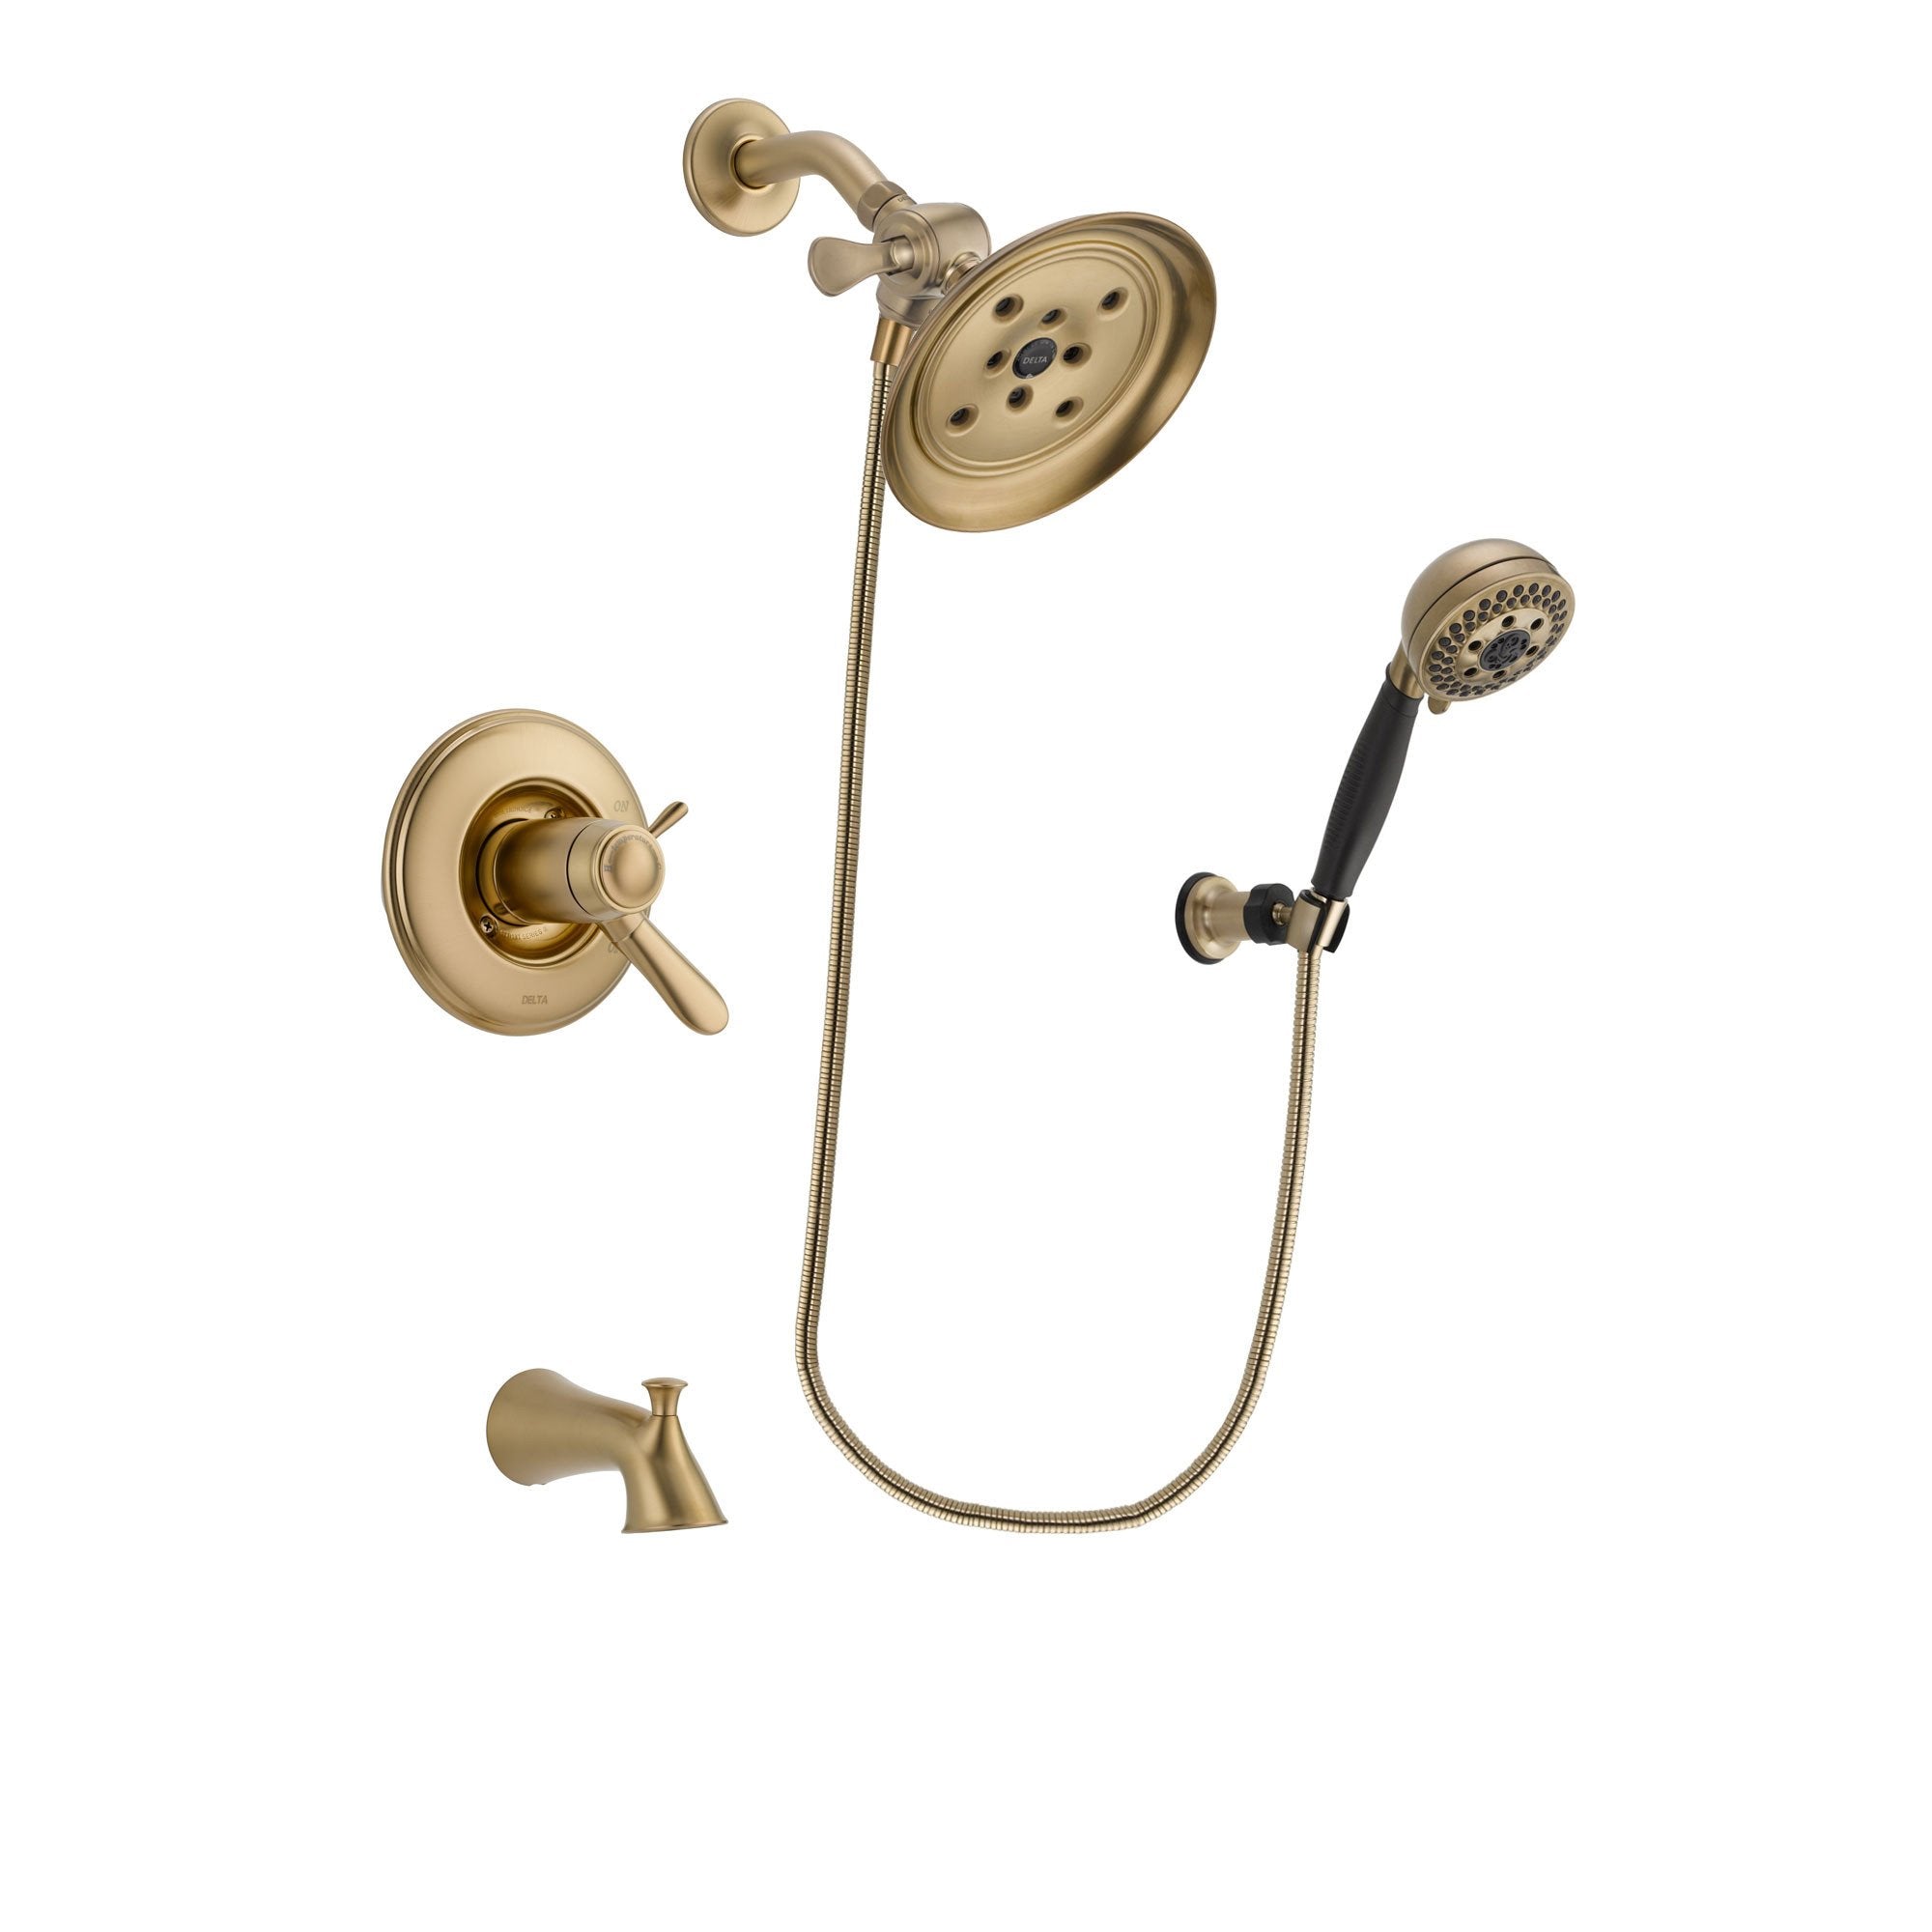 Delta Lahara Champagne Bronze Finish Thermostatic Tub and Shower Faucet System Package with Large Rain Shower Head and 5-Spray Wall Mount Hand Shower Includes Rough-in Valve and Tub Spout DSP3785V